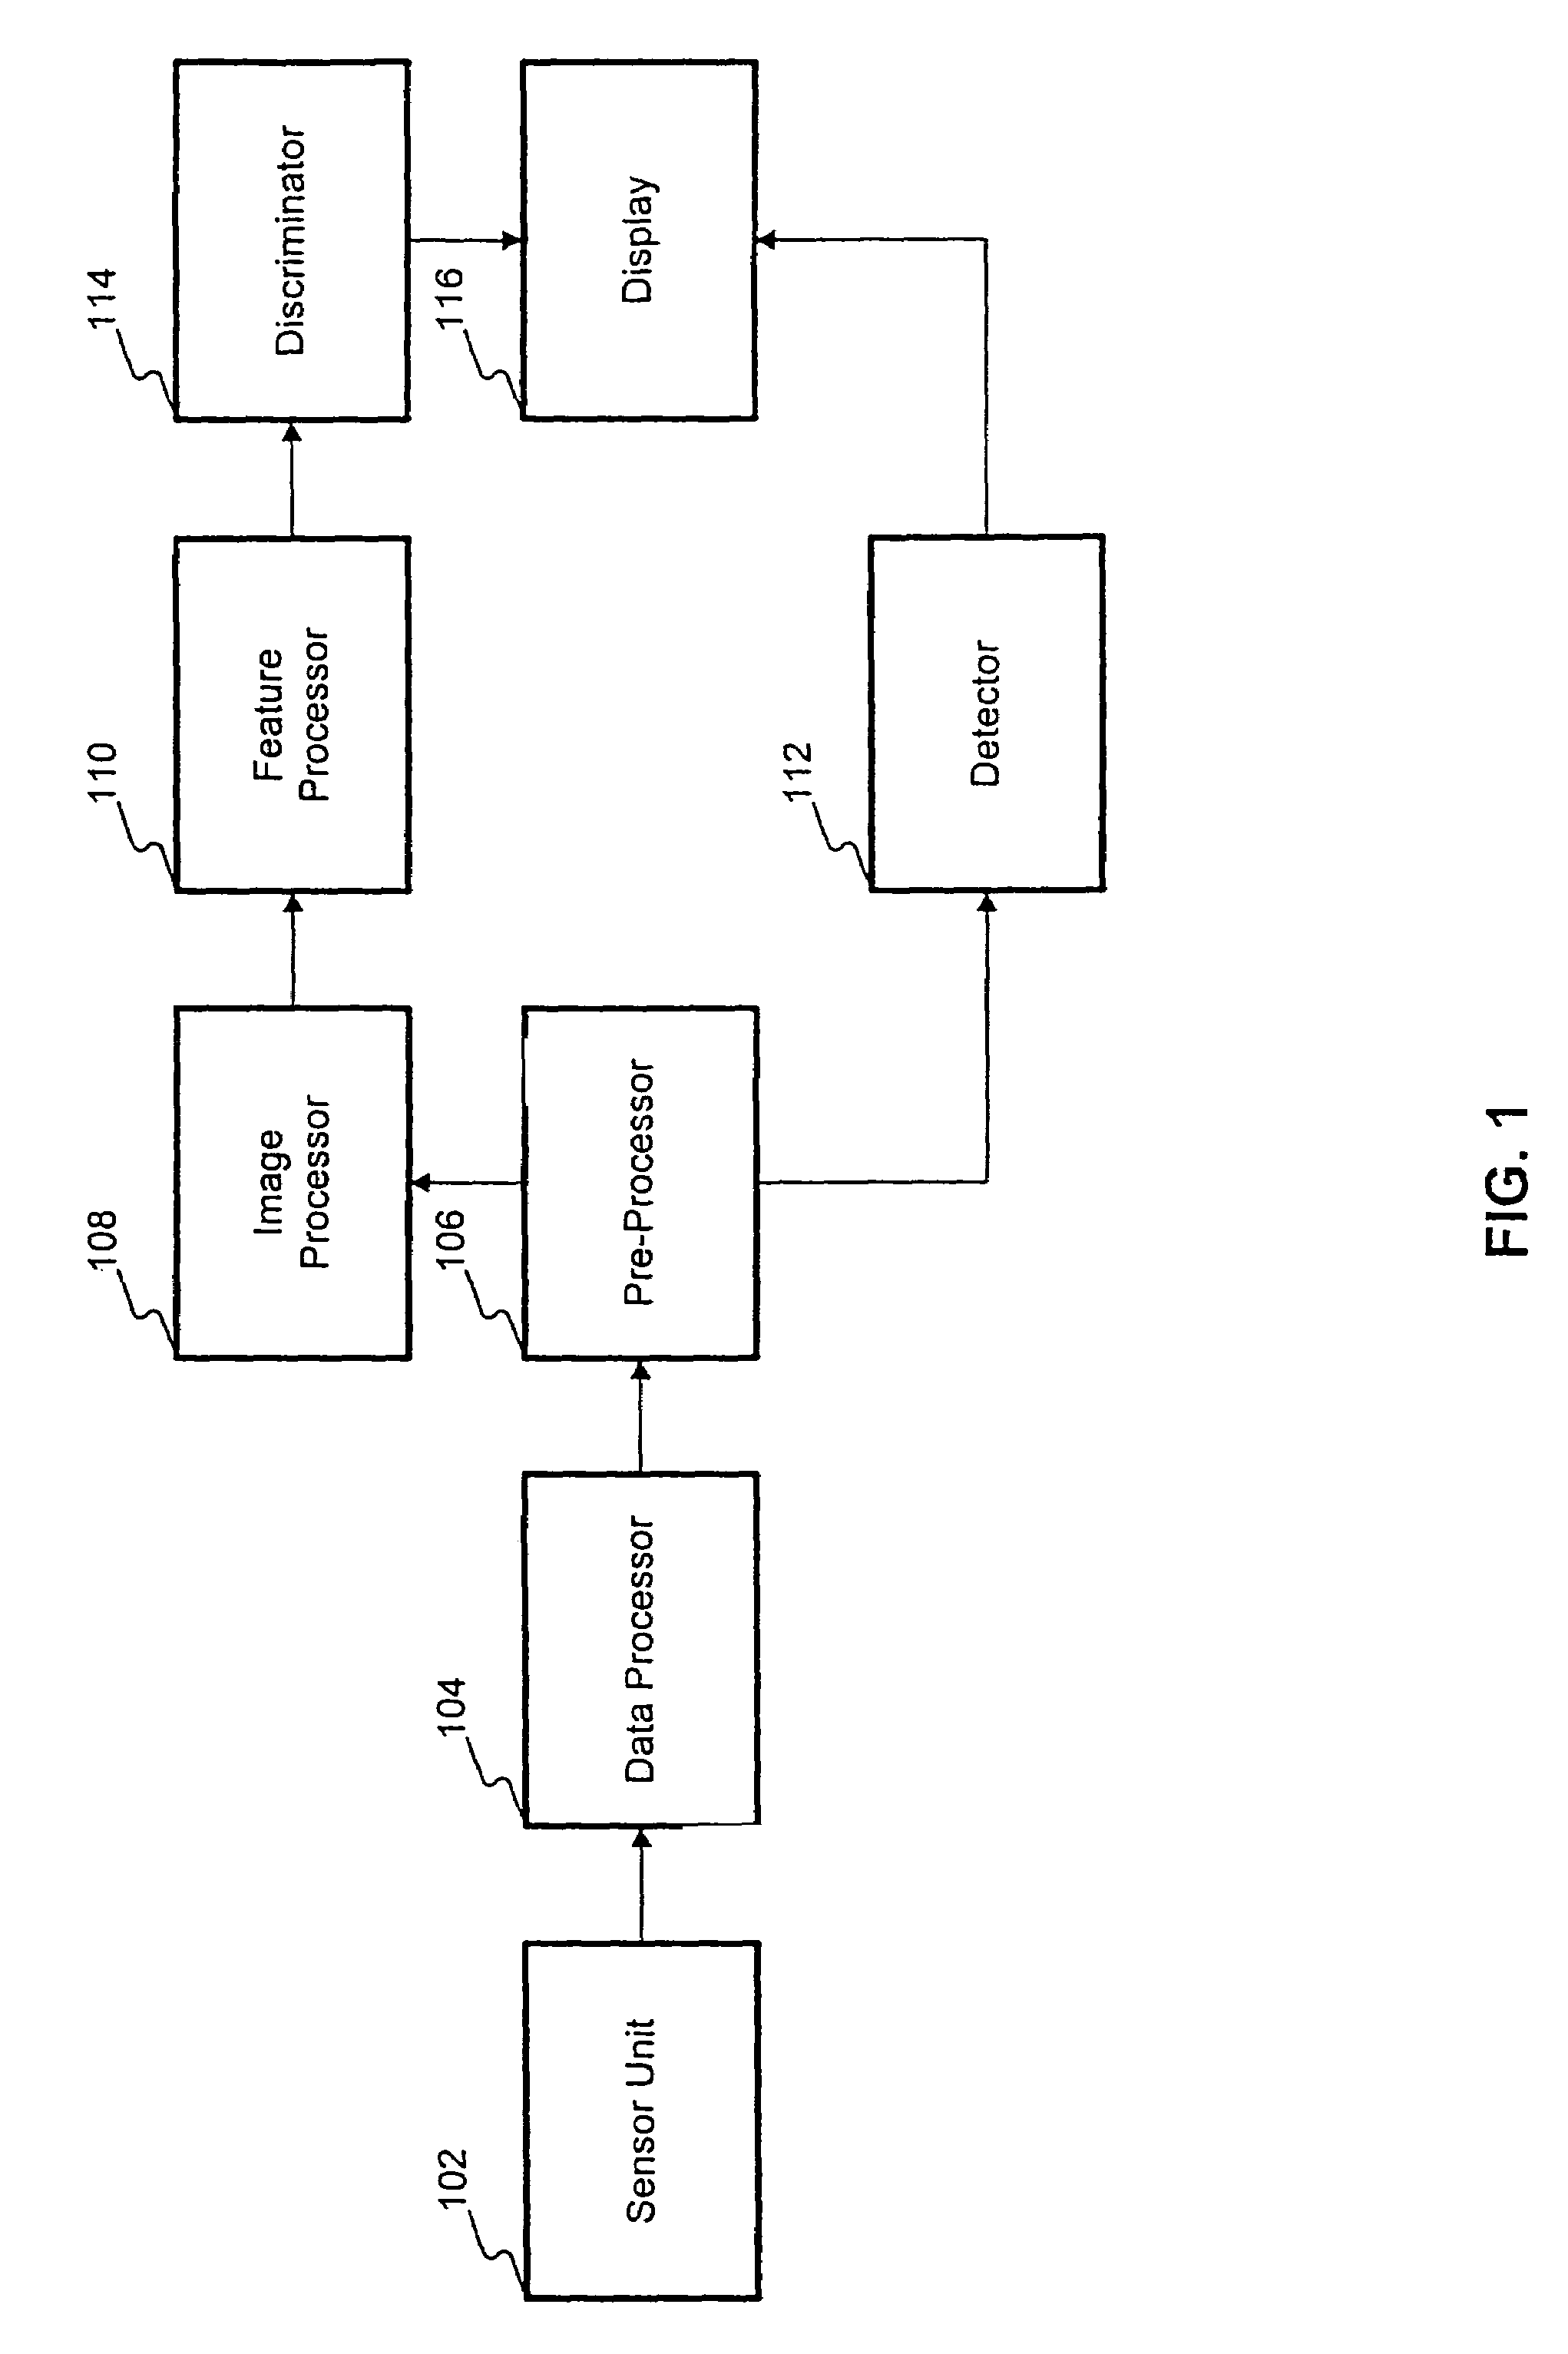 Method and apparatus for identifying buried objects using ground penetrating radar